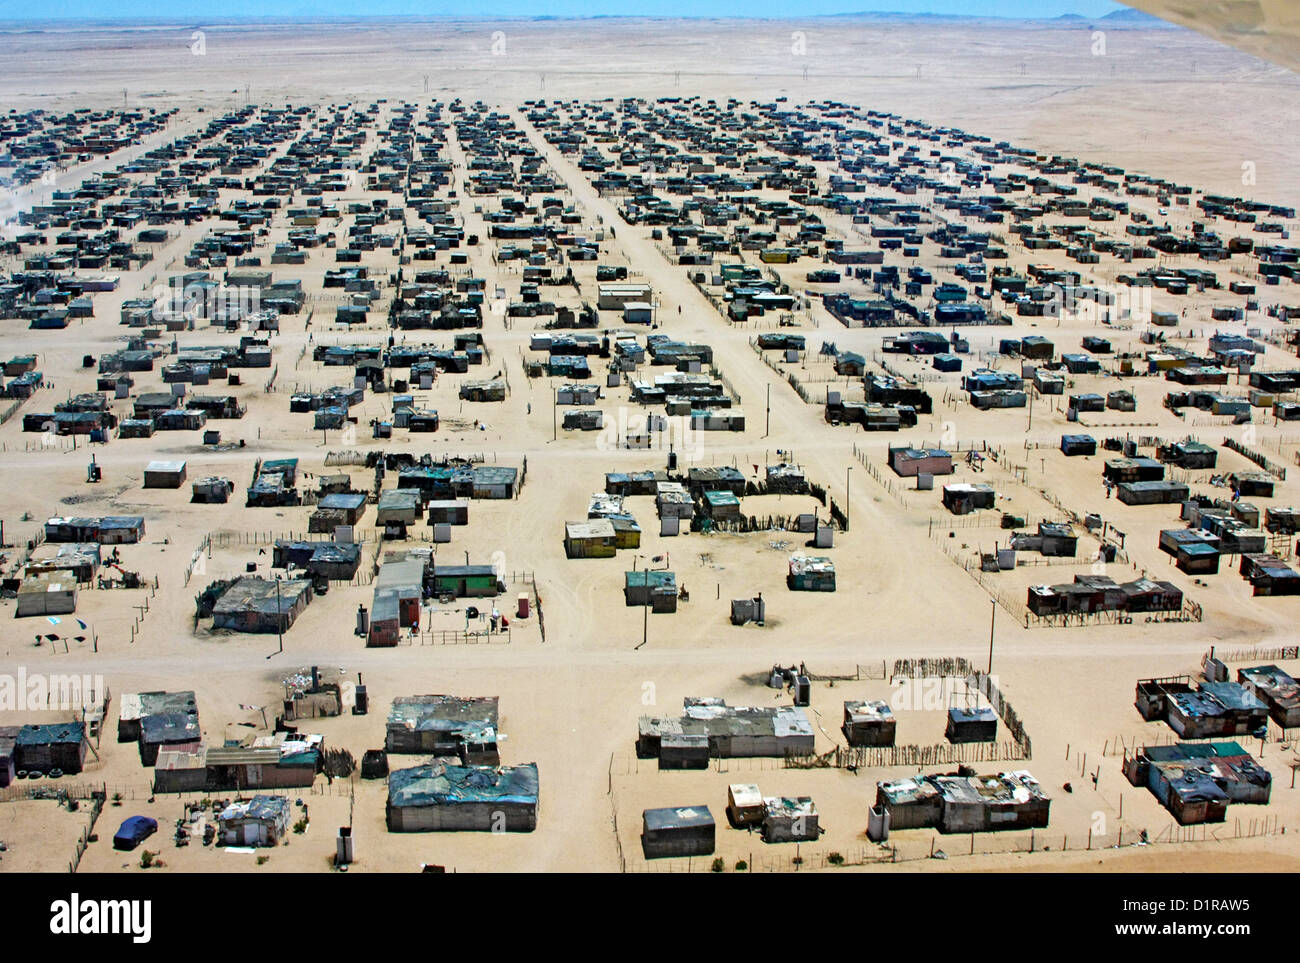 An aerial view of Swakopmund settlement Stock Photo